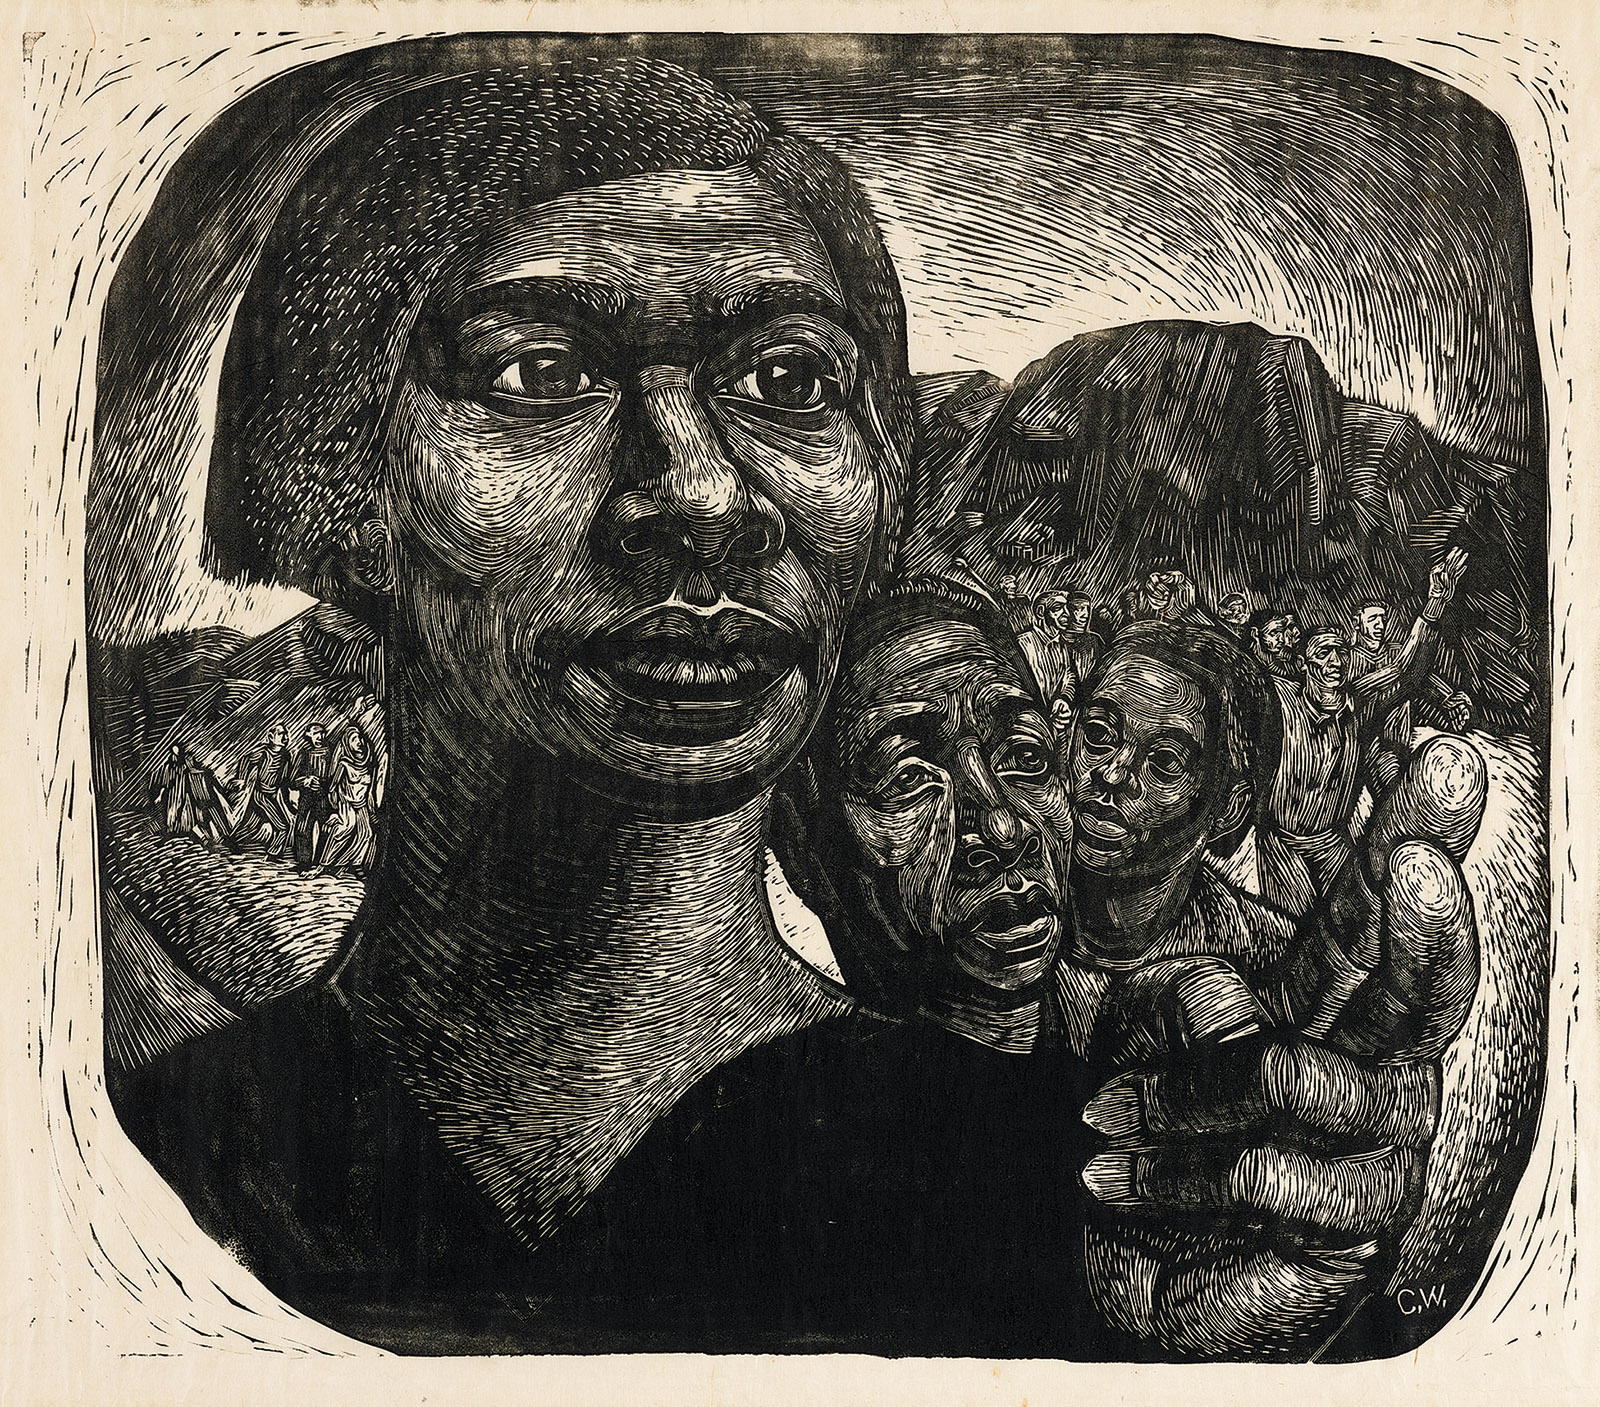 Charles White: Exodus I: Black Moses (Harriet Tubman), 1951; from the exhibition ‘Charles White: A Retrospective,’ on view at the Museum of Modern Art, New York City, until January 13, 2019. The catalog is published by the Art Institute of Chicago and MoMA and distributed by Yale University Press.